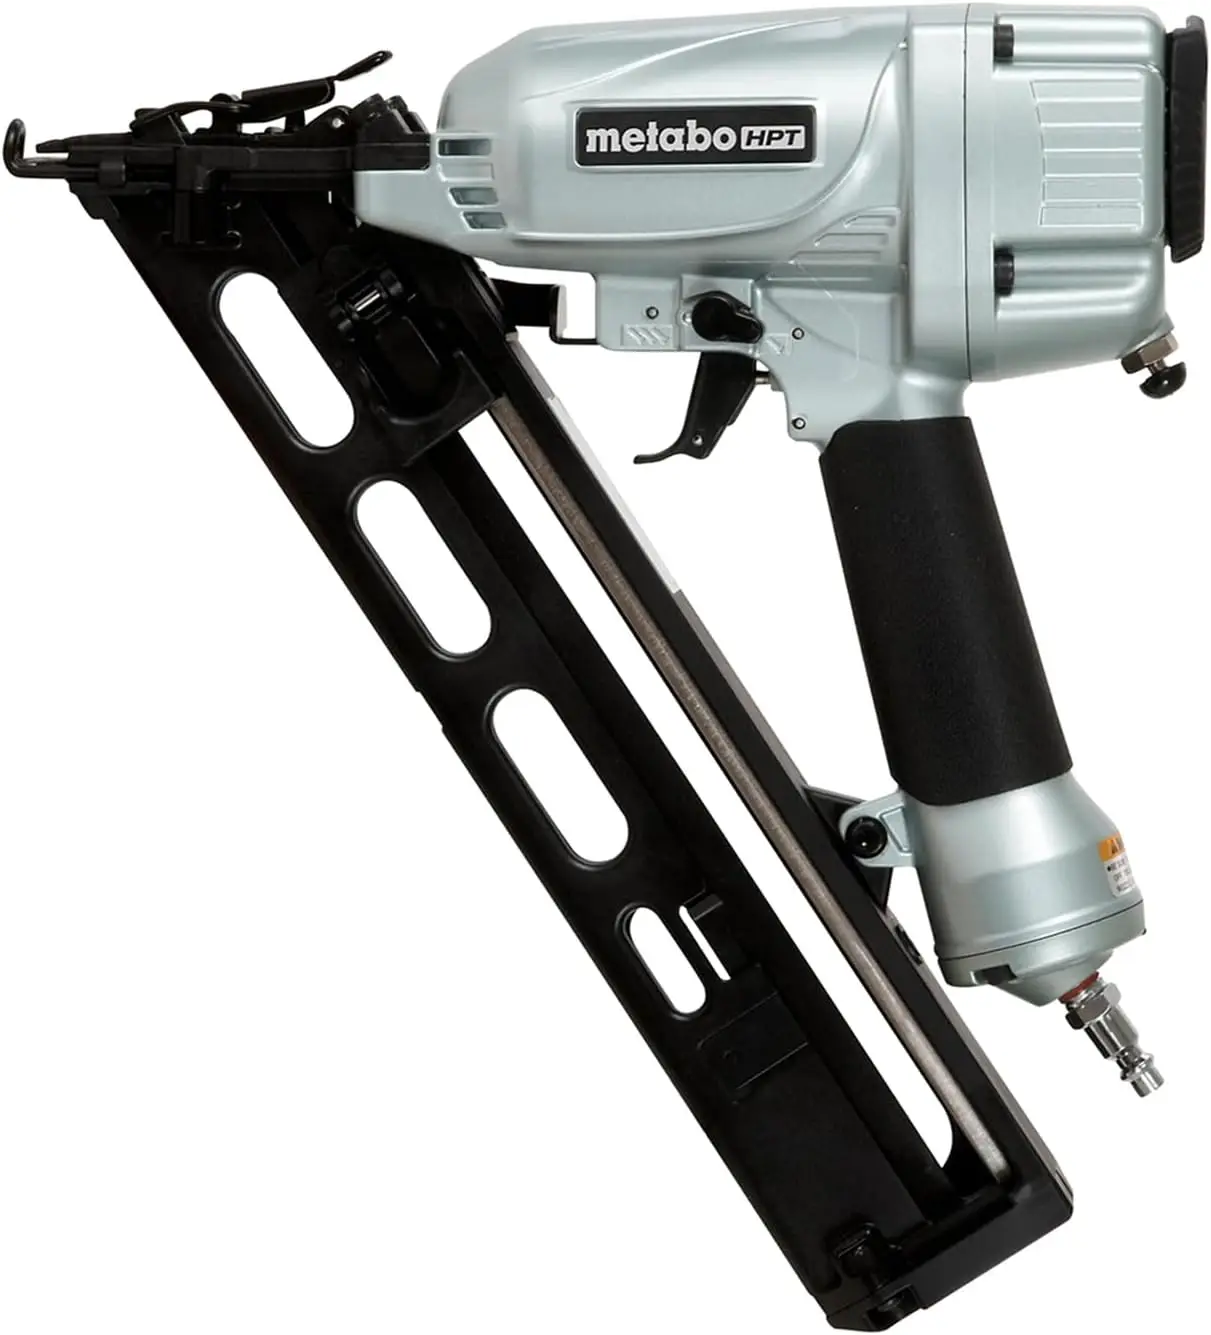 

Metabo HPT Finish Nailer, 15 Gauge, Pro Preferred Brand of Pneumatic Nailers, Finish Nails 1-1/4-Inch up to 2-1/2-Inch